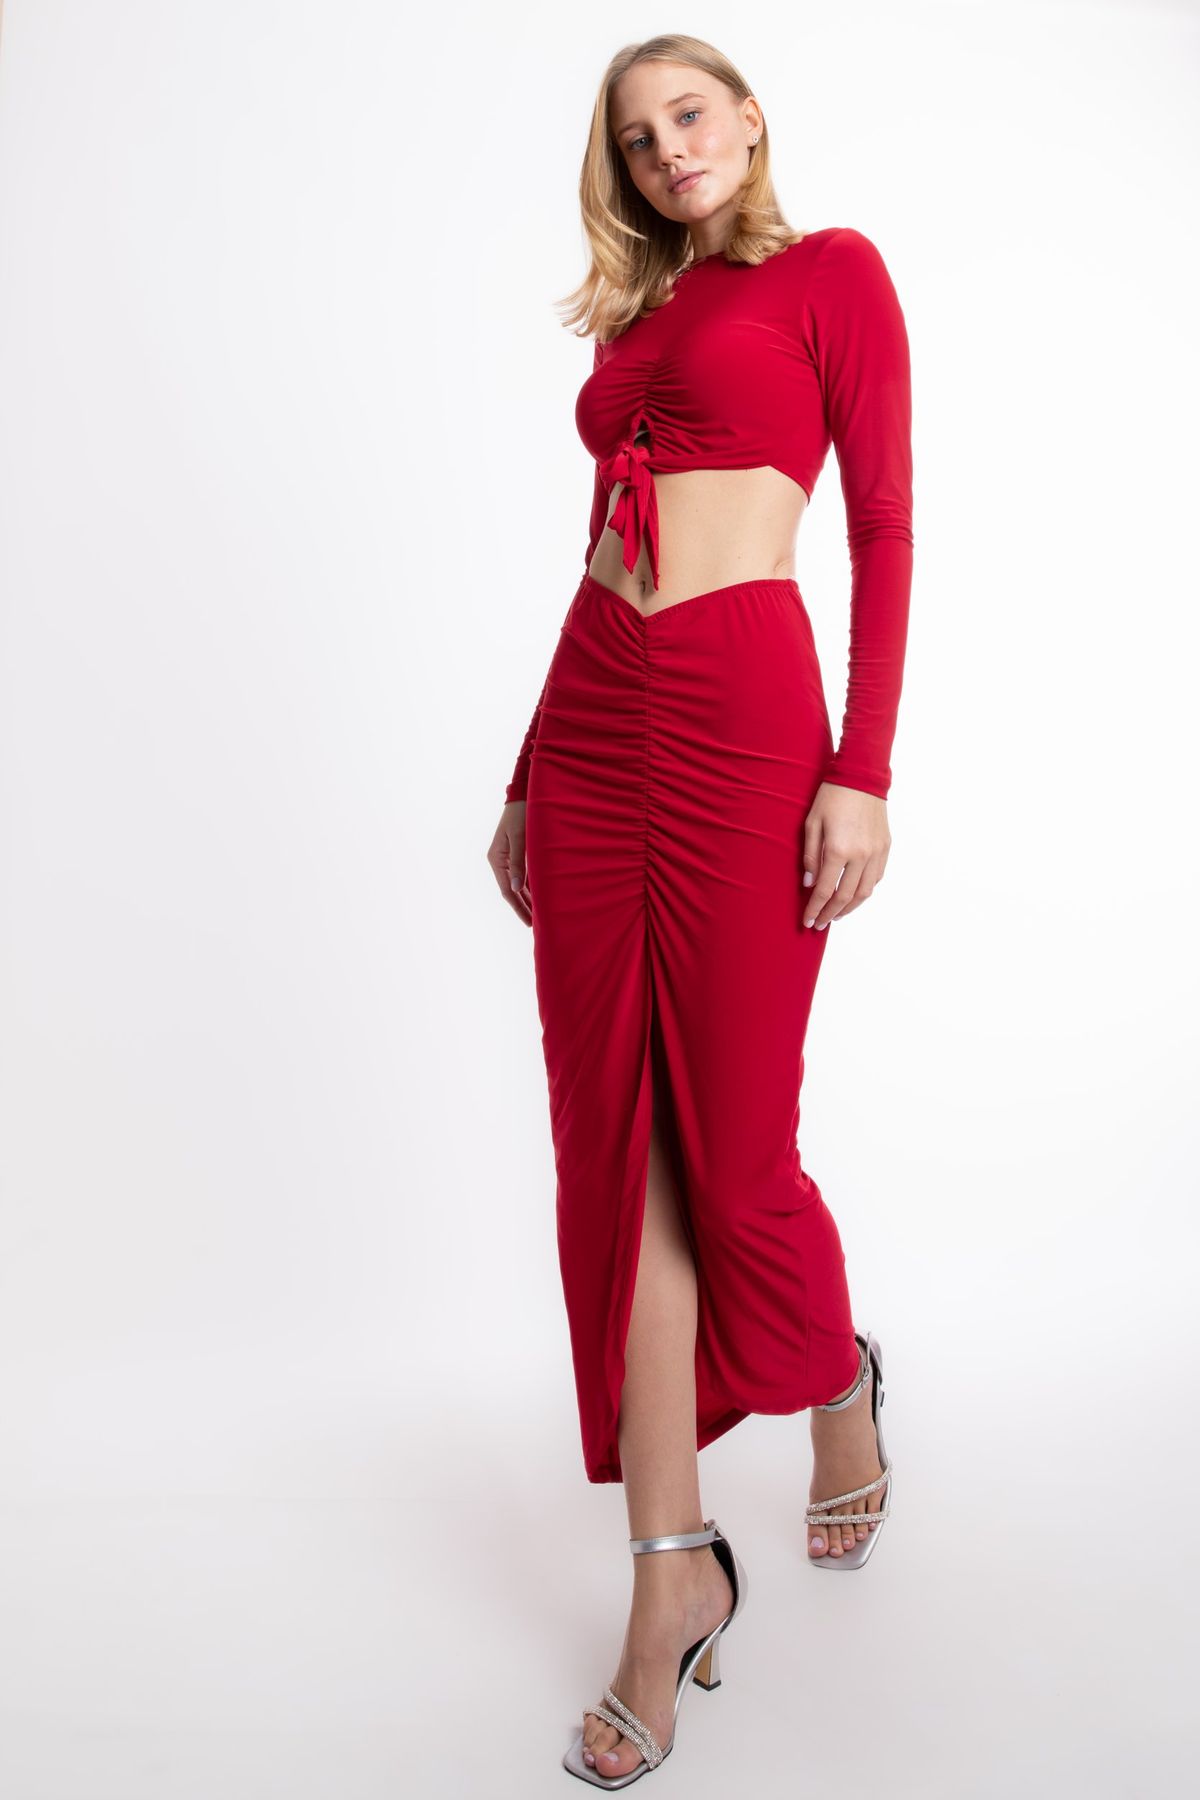 2 Pieces: Round Neck Jersey Crop Top with a Tie Up Detail & High Waist Ruched Front Slit Maxi Skirt